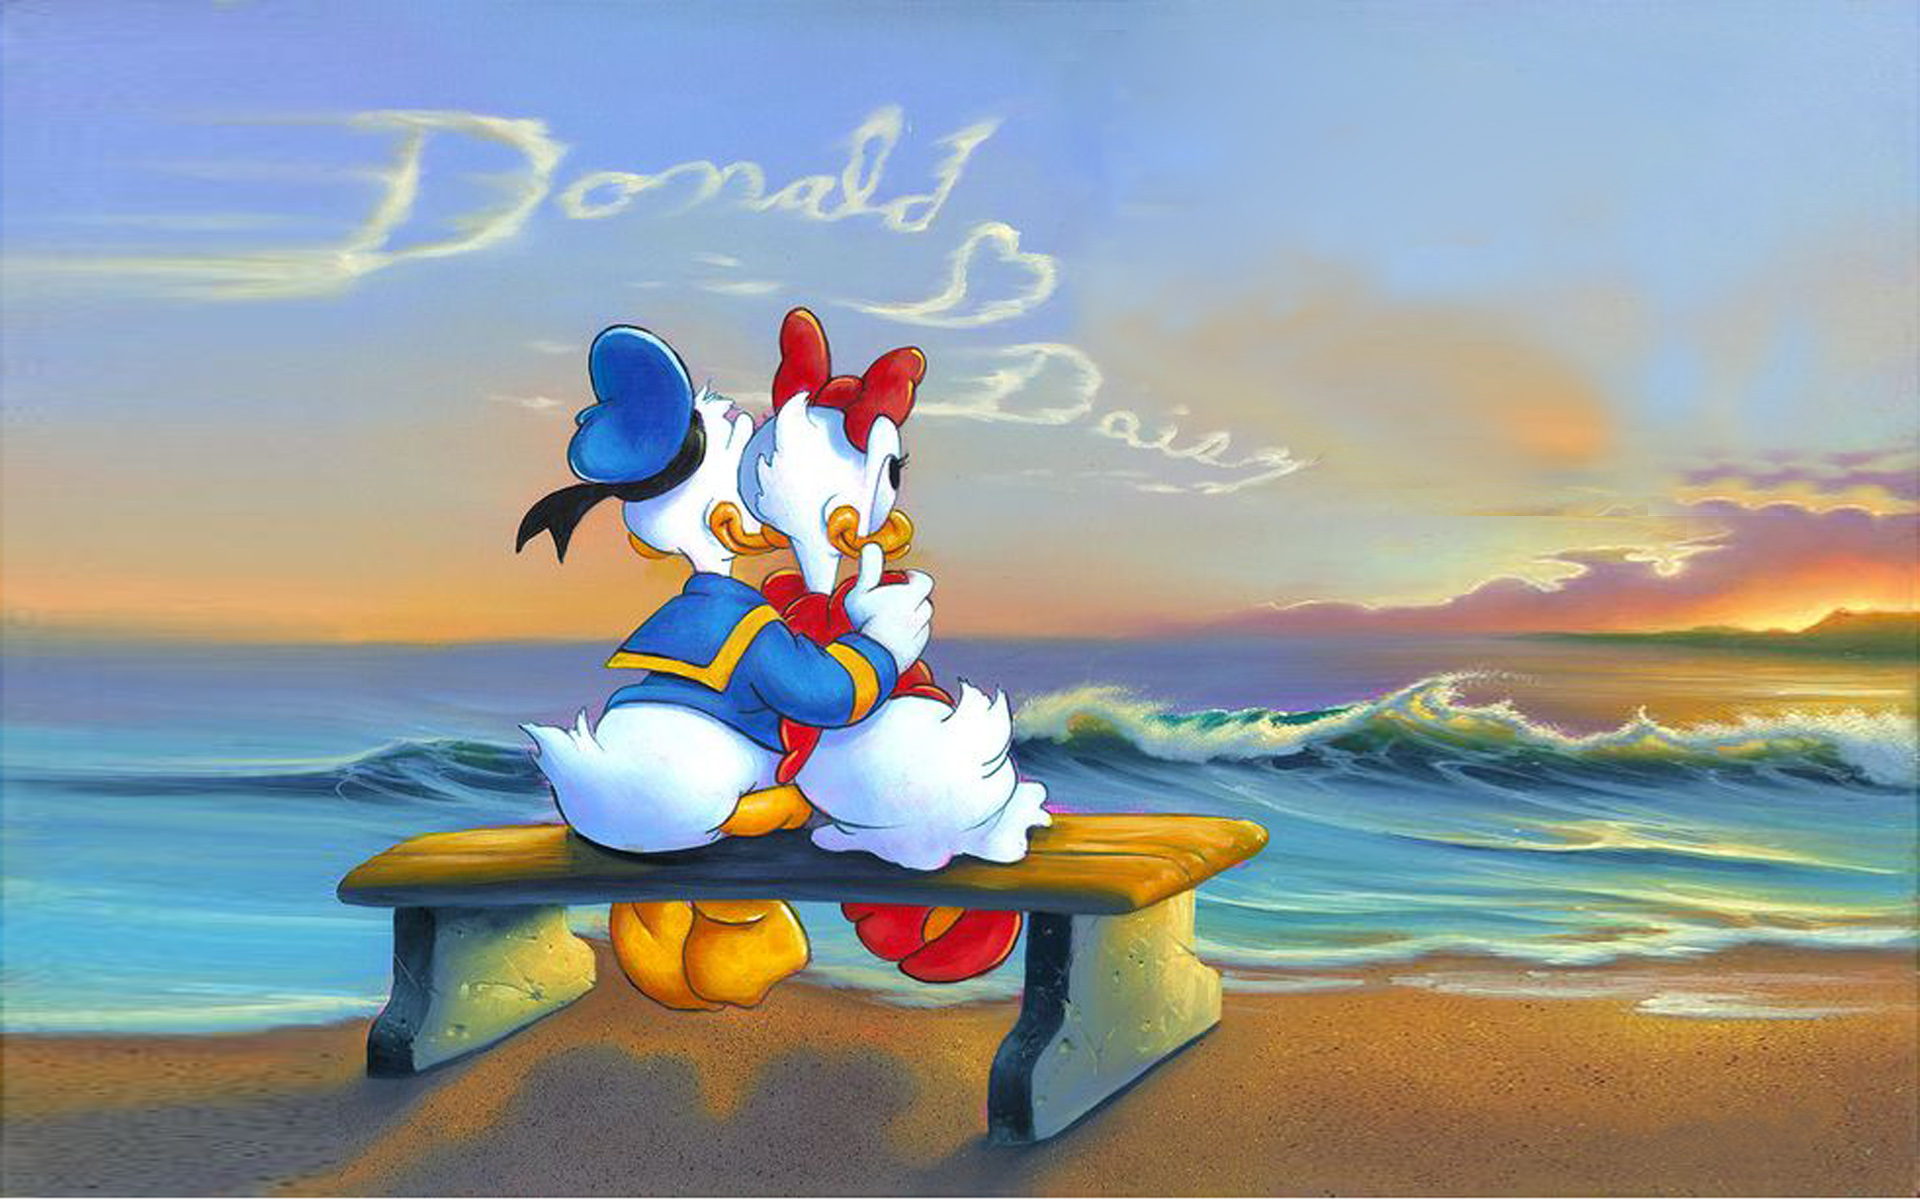 Donald Duck And Daisy Suset Message In The Clouds Romantic Couple